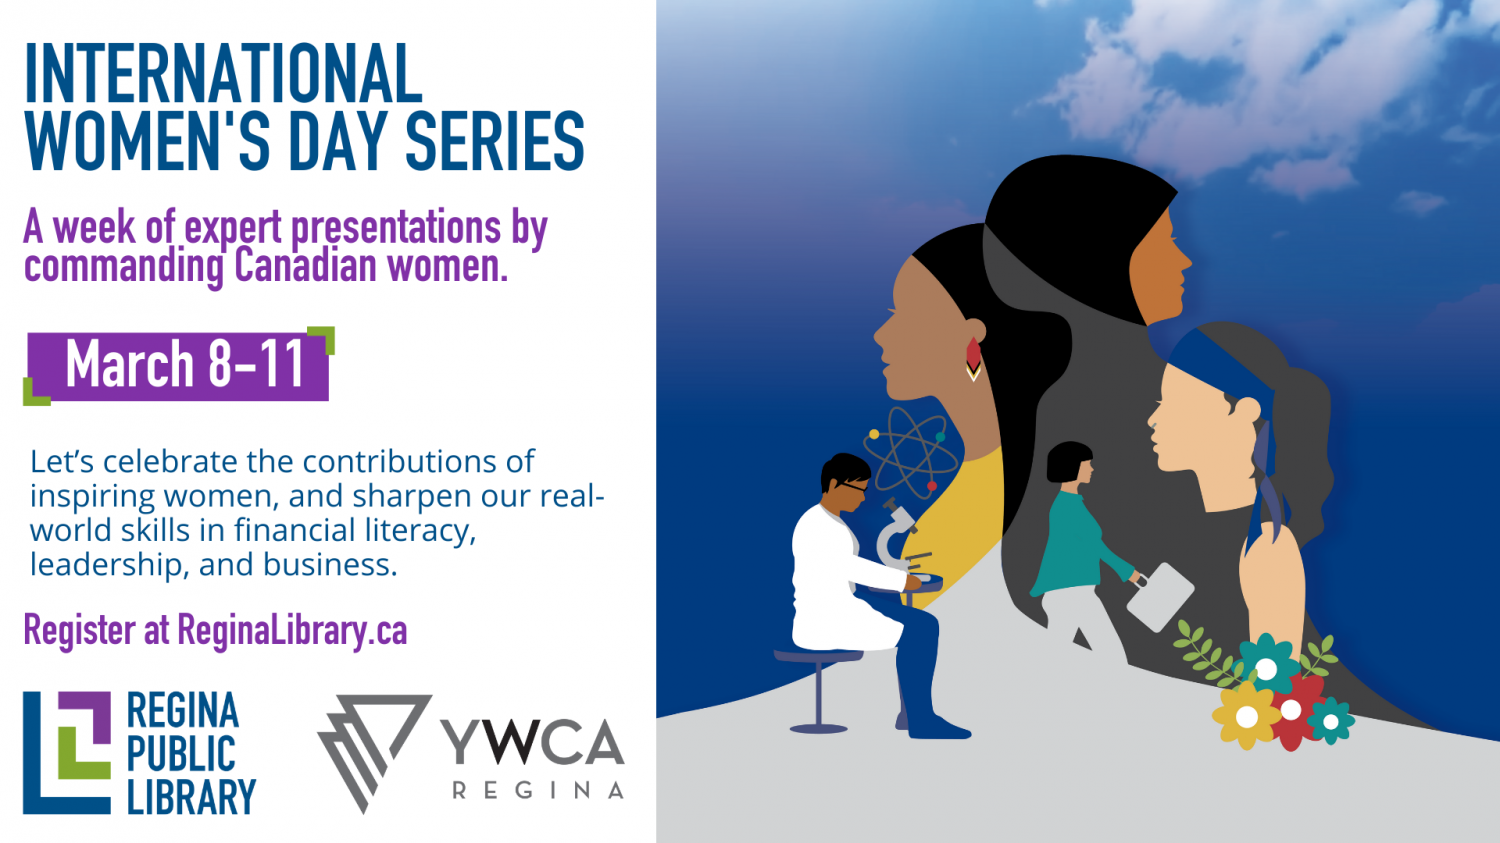 International Women's Day Series at Regina Public Library - starting March 8th!